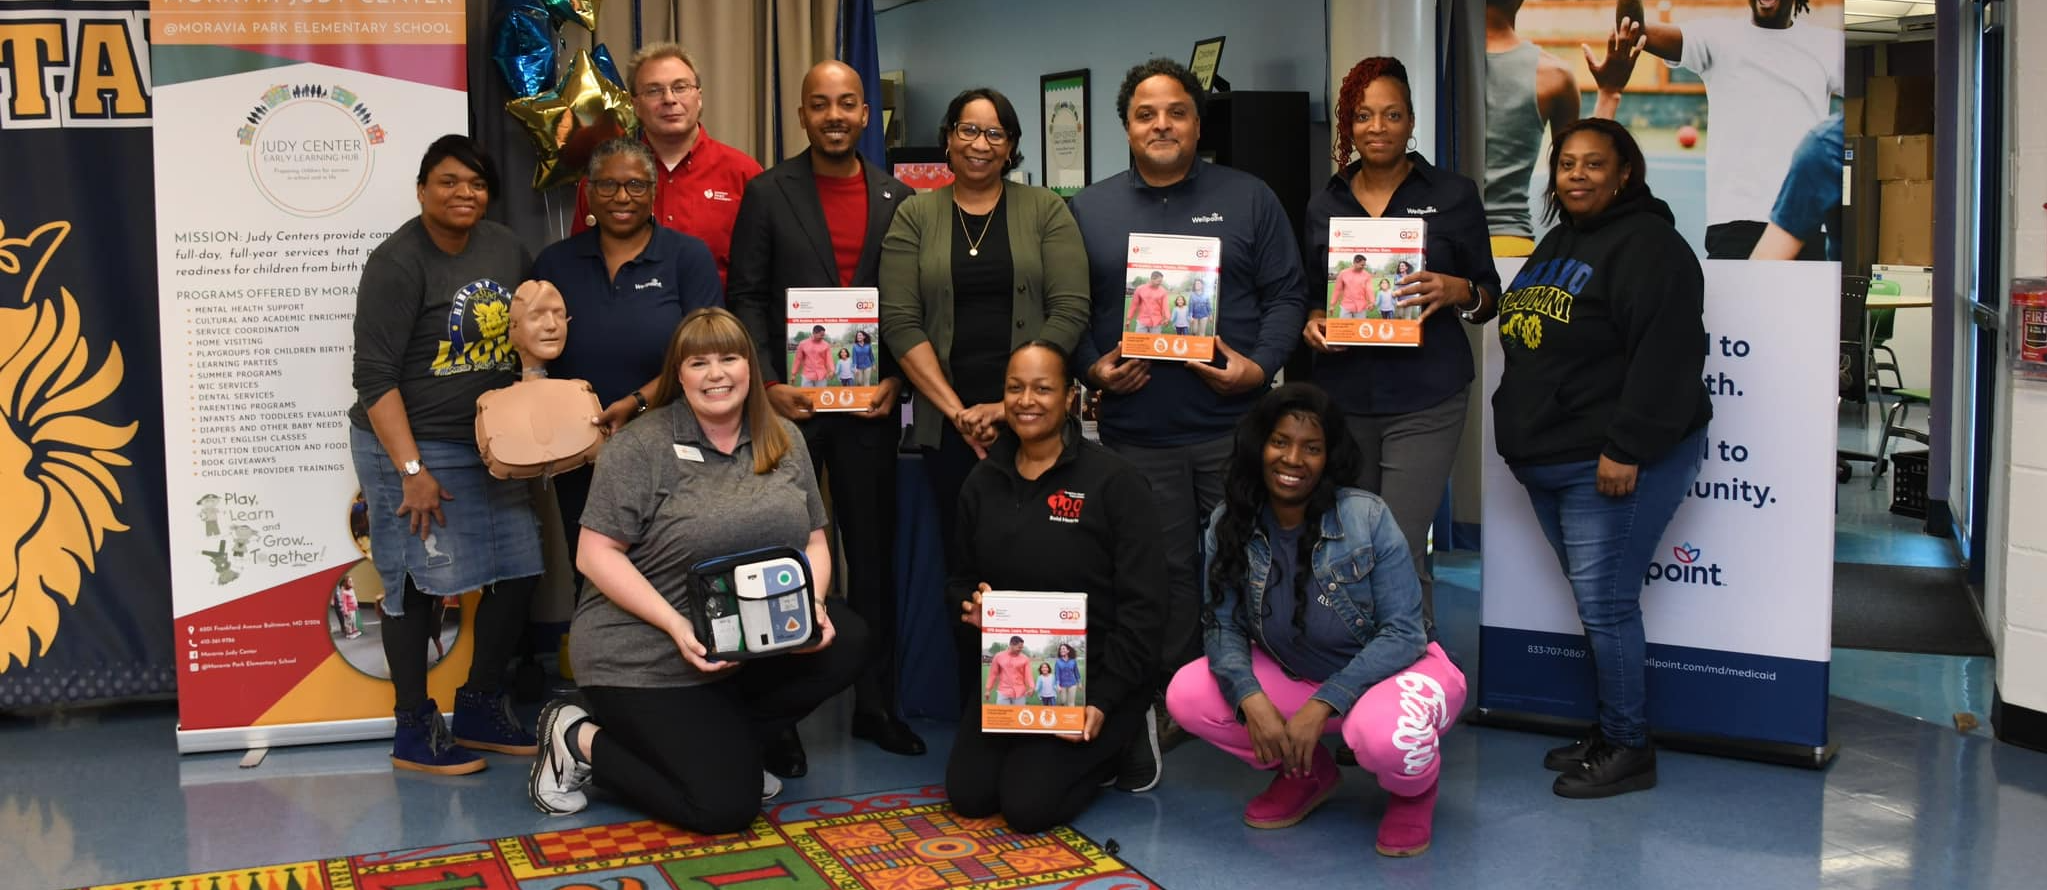 Moravia Judy Center - CPR Class for families in honor of Heart Month